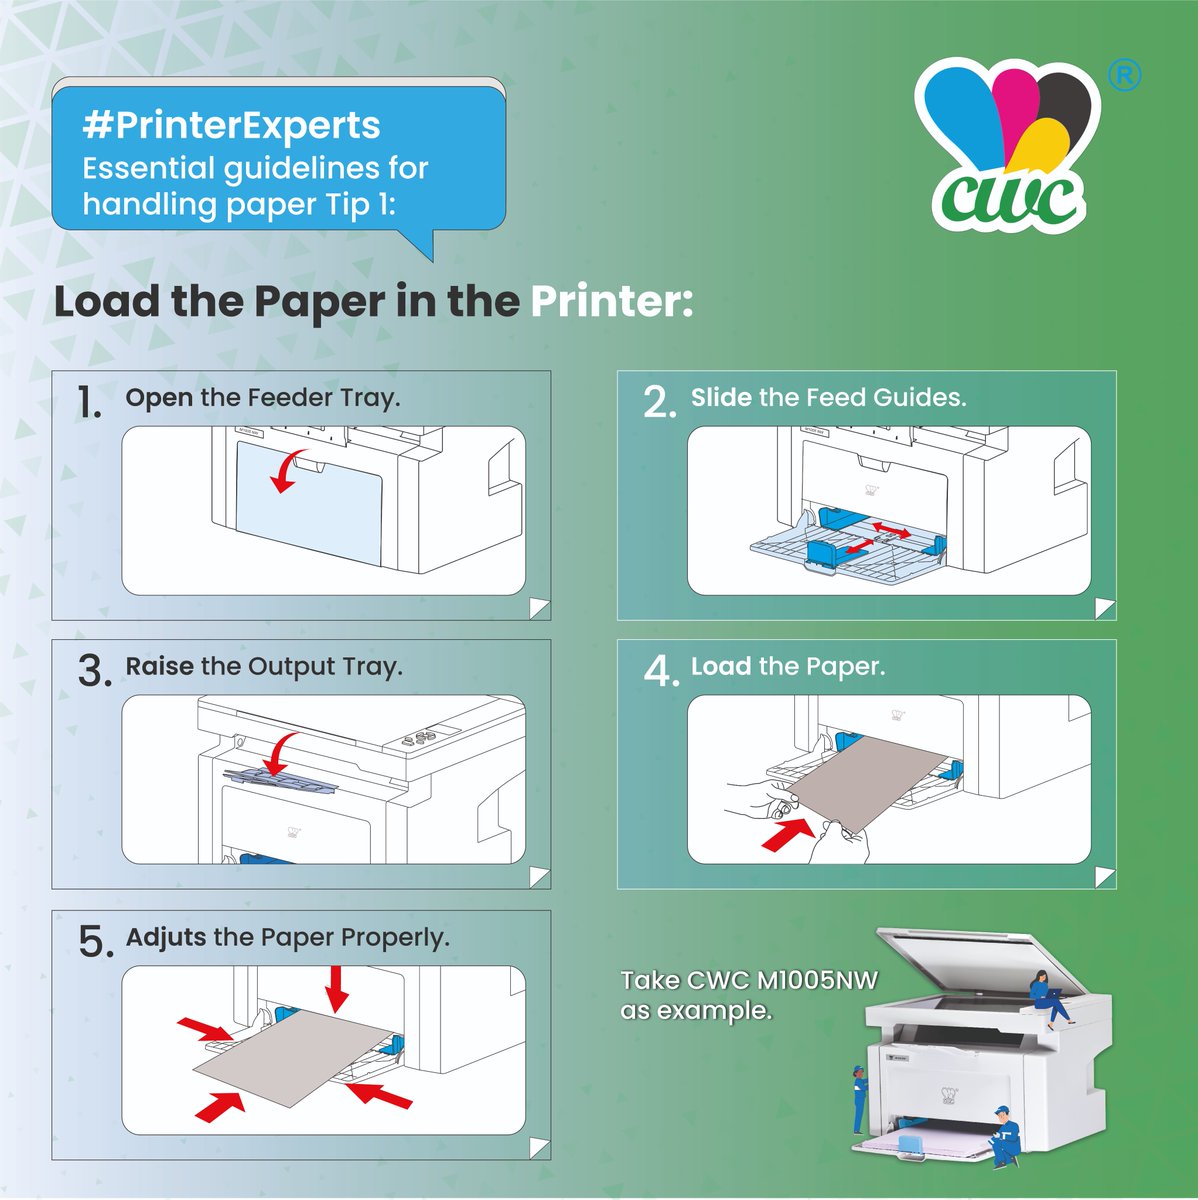 🖨️ Are you feeling lost when it comes to using a CWC Laser Printer? 
🎓 One of the fundamental steps is understanding how to properly load paper into your printer. 
#CWCprinter #LaserPrinter #printerbasics #printingtips #learnprinting #office #PrinterExperts #cwc #Ecompusell